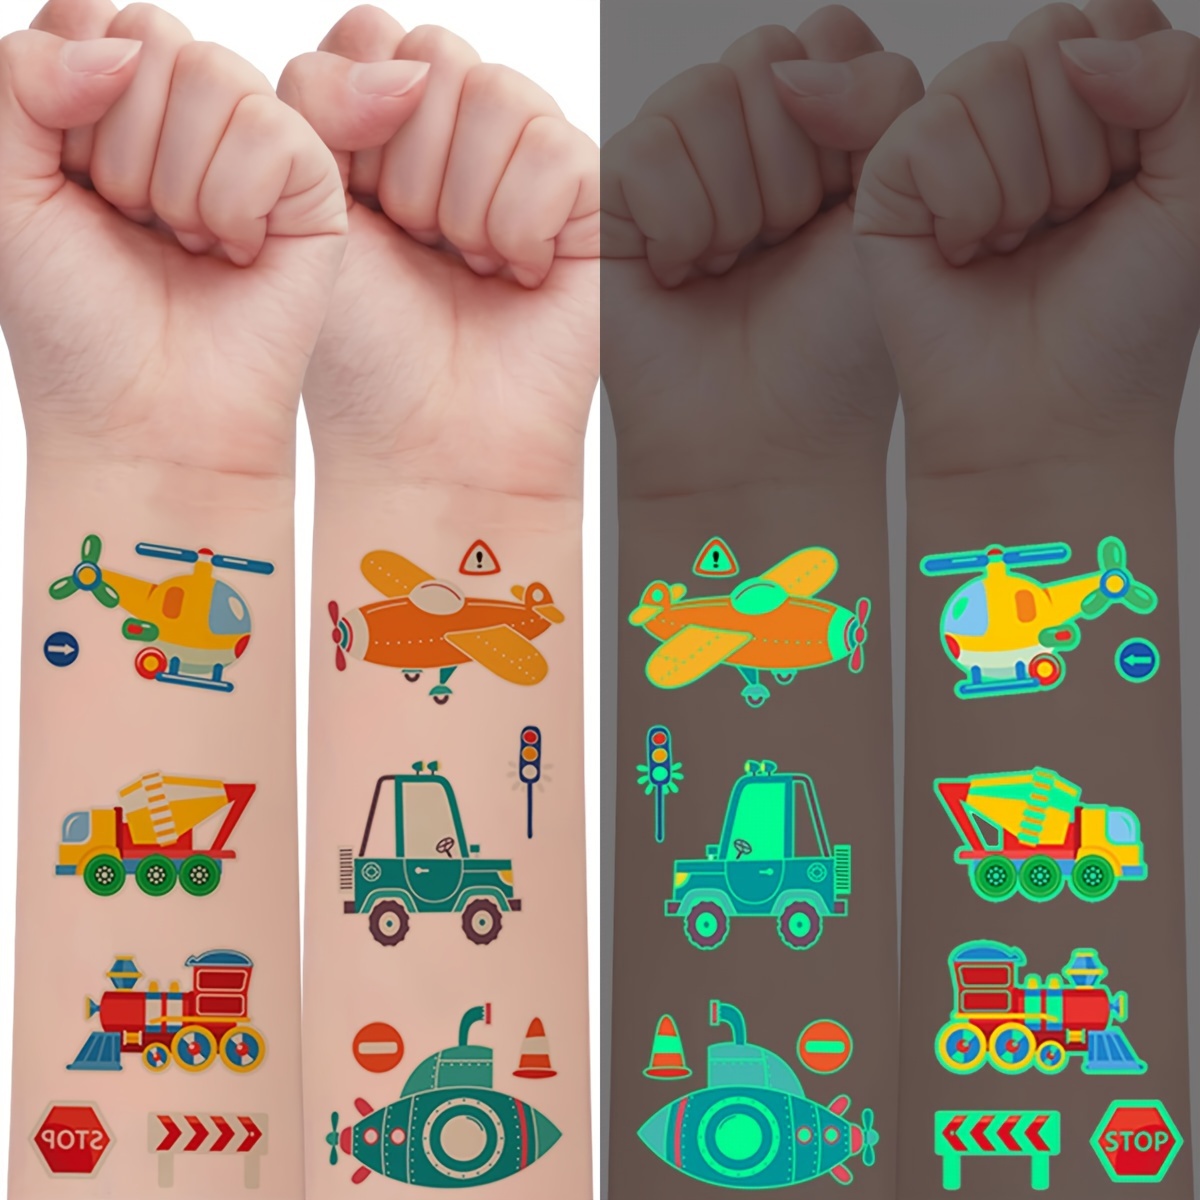 

10-sheet Glow In The Dark Temporary Tattoos, Cartoon Transport Vehicles Designs, Taxi-bus-traffic Light-train-machinery Elements, Fun Luminous Stickers For Birthday Party Favors For Music Festival